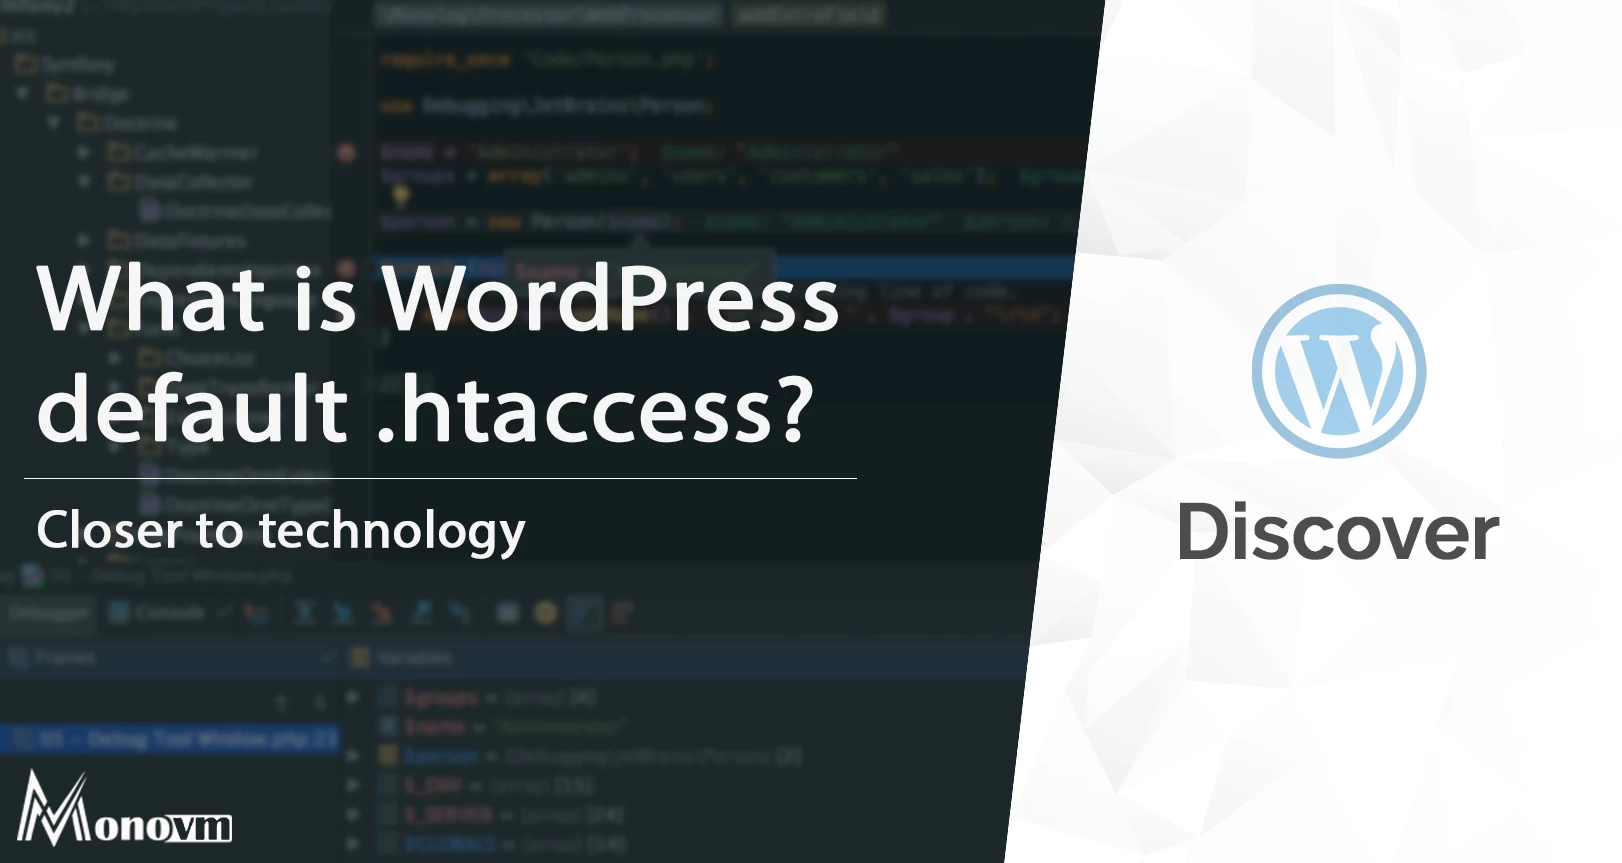 What is WordPress Default htaccess File Contents?